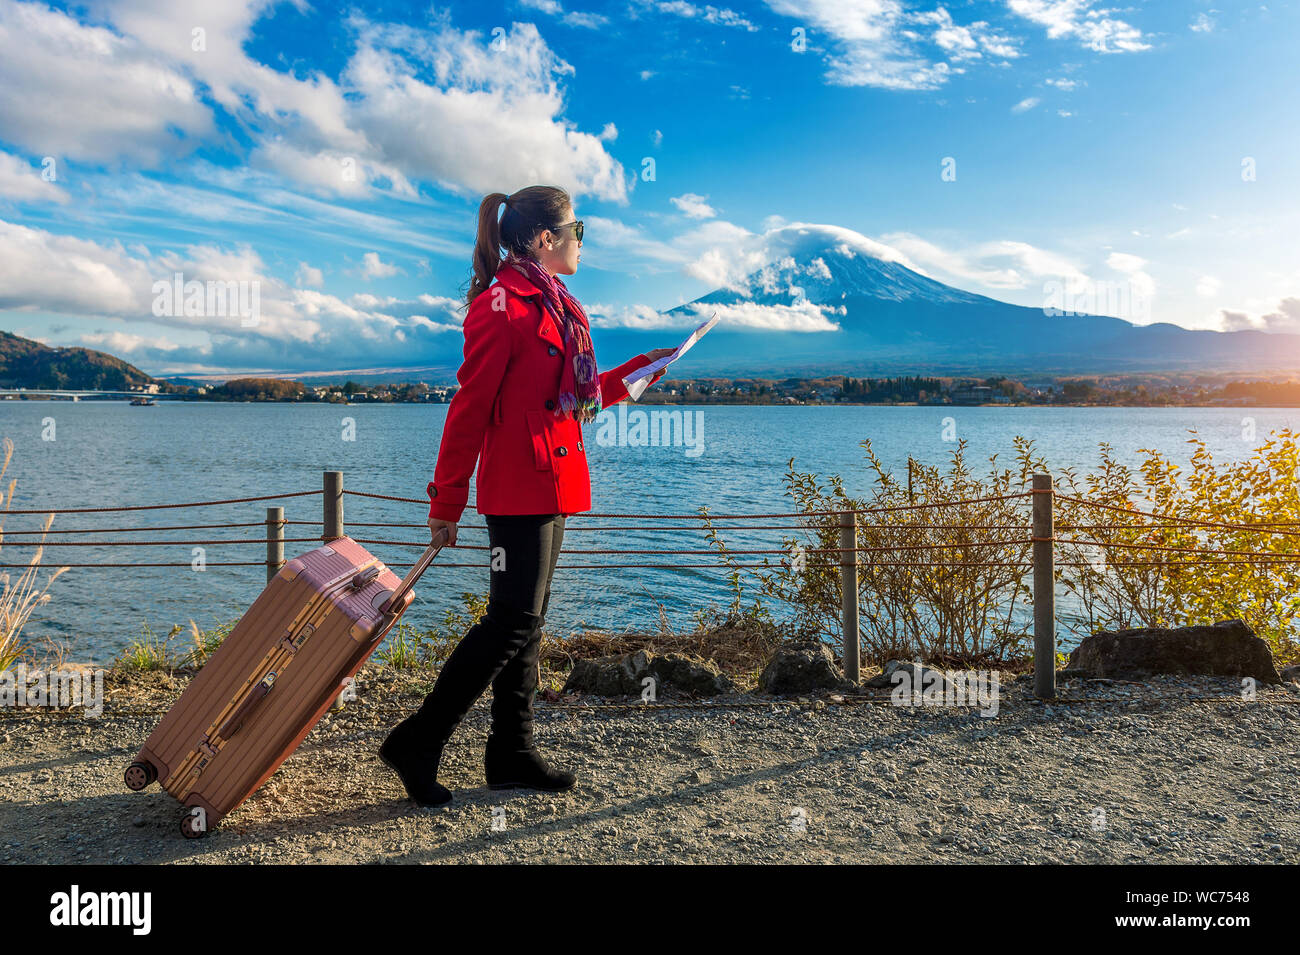 Full Length Of Woman With Luggage Standing By Lake Kawaguchi Holding Map Stock Photo